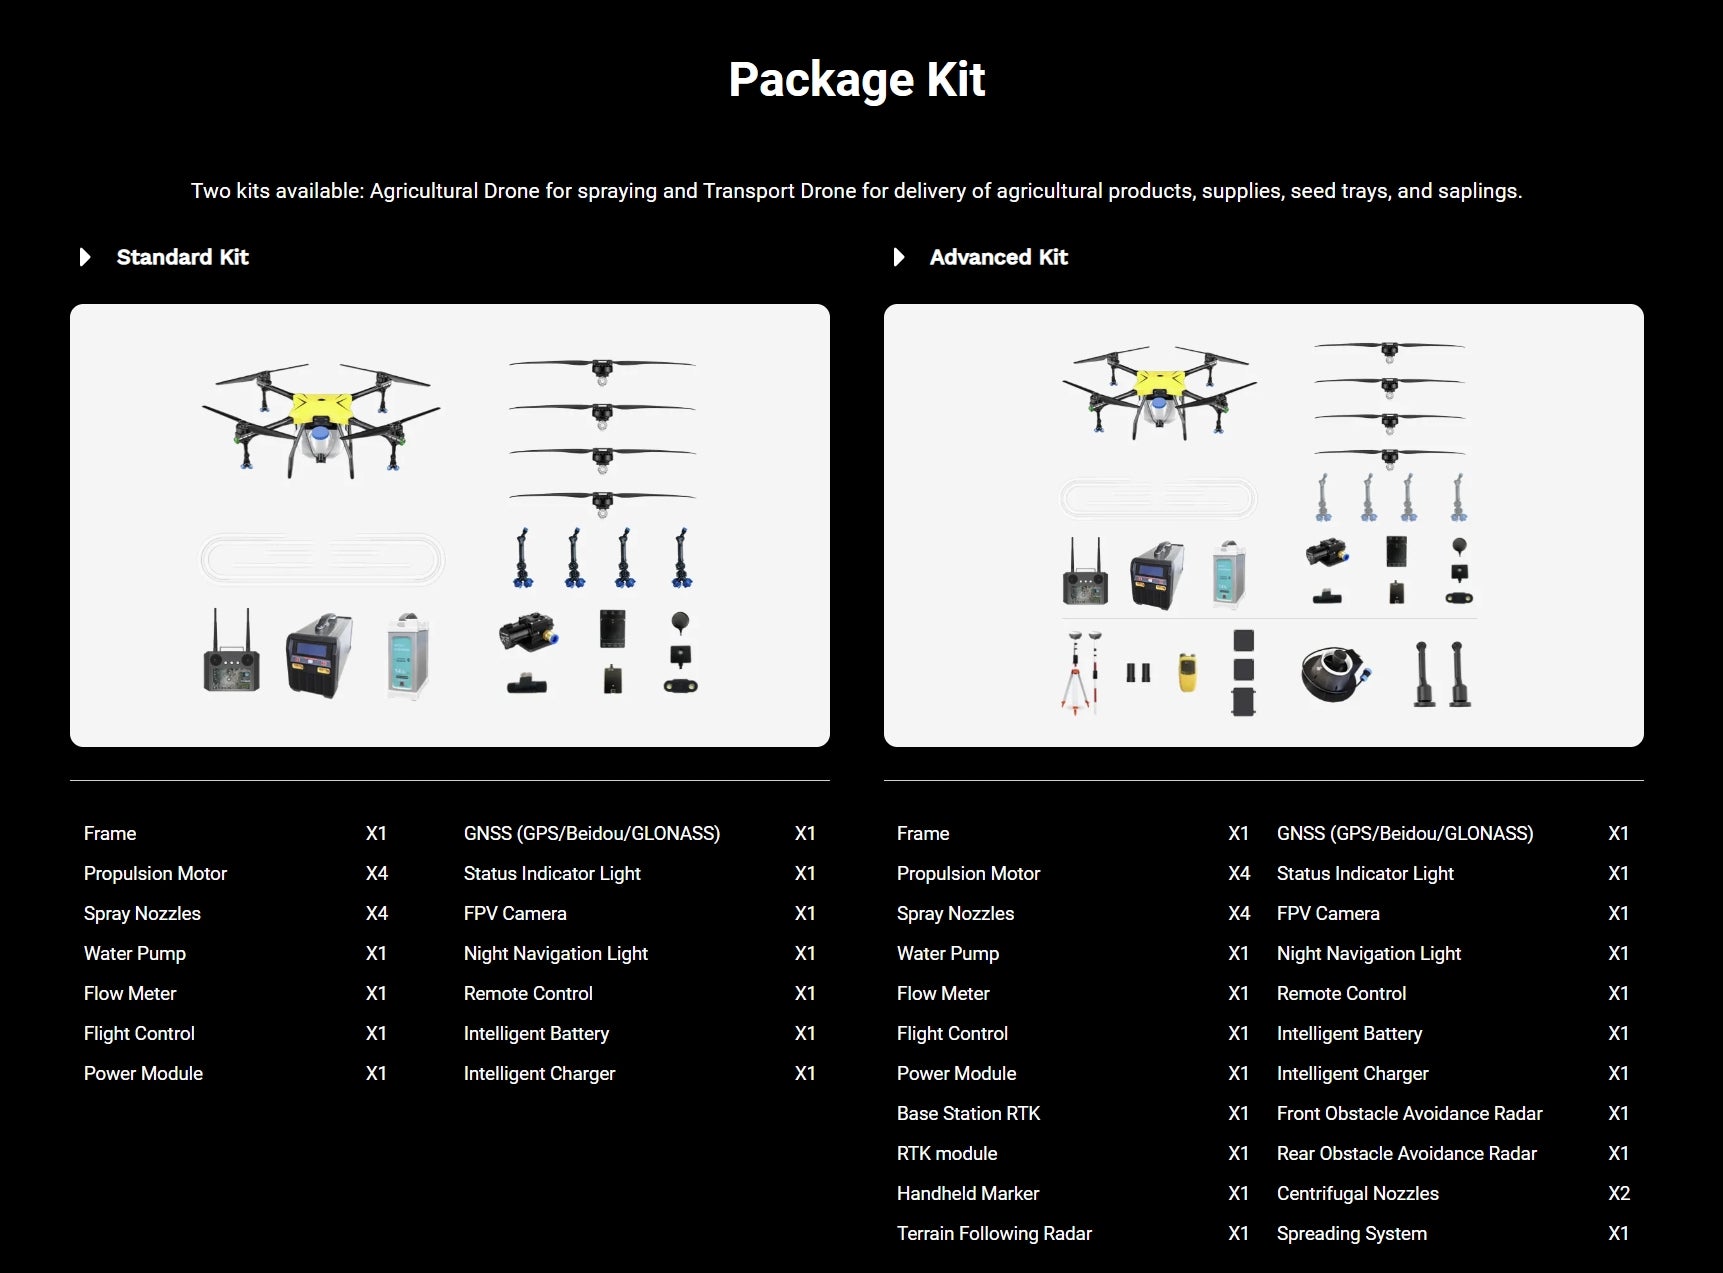 H60-4 Agricultural Drone, Standard Kit Advanced Kit Frame X1 GNSS (GPS/Beidou